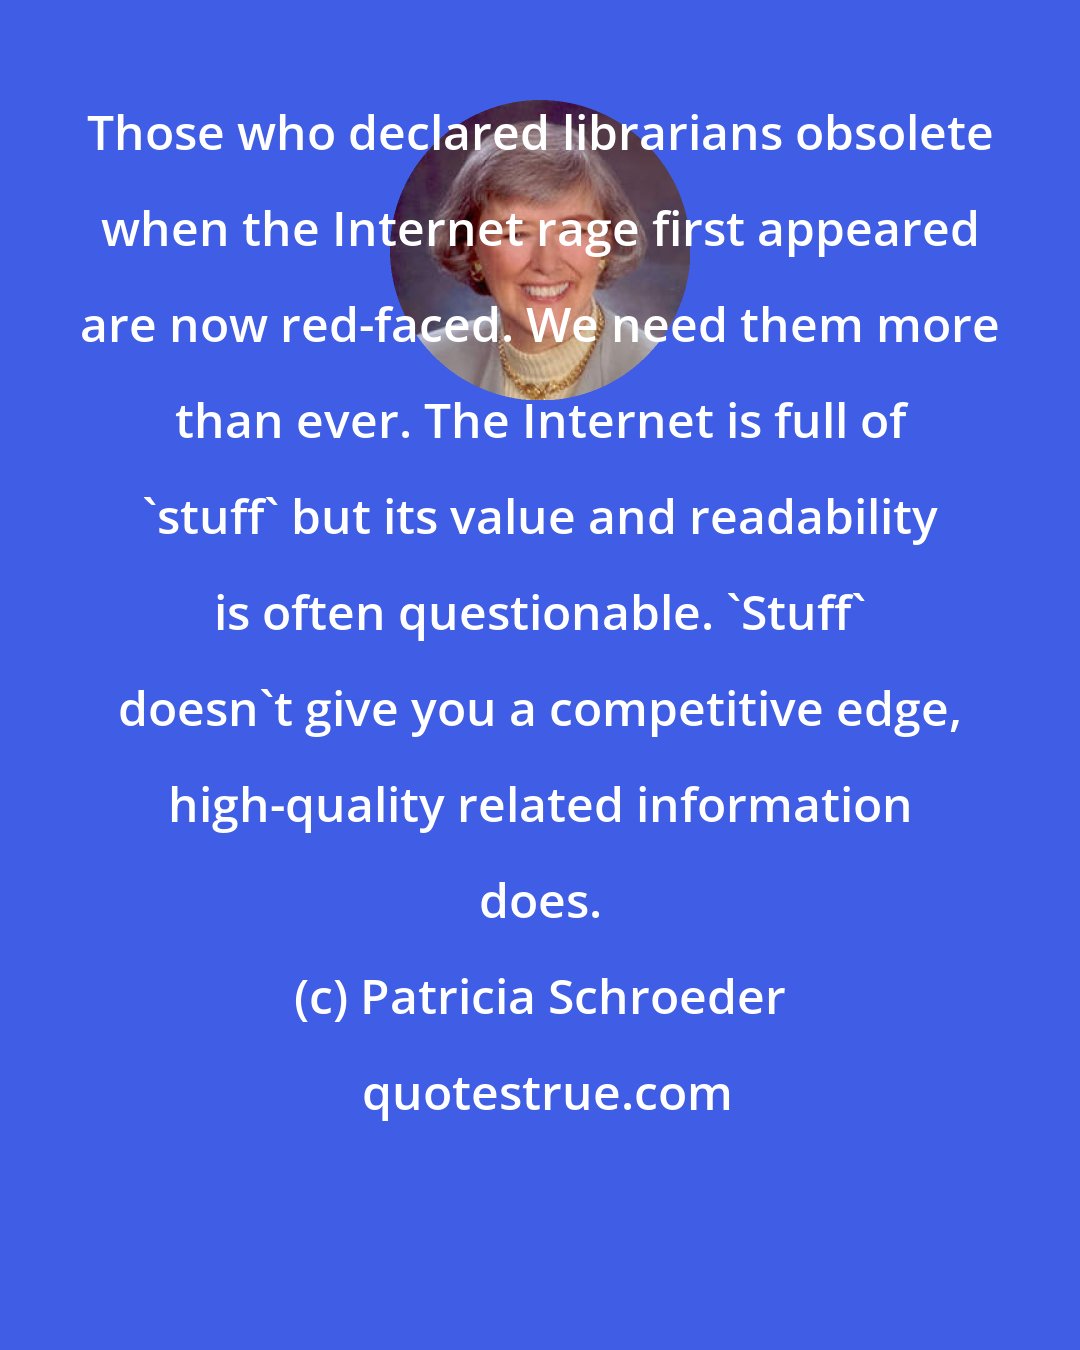 Patricia Schroeder: Those who declared librarians obsolete when the Internet rage first appeared are now red-faced. We need them more than ever. The Internet is full of 'stuff' but its value and readability is often questionable. 'Stuff' doesn't give you a competitive edge, high-quality related information does.